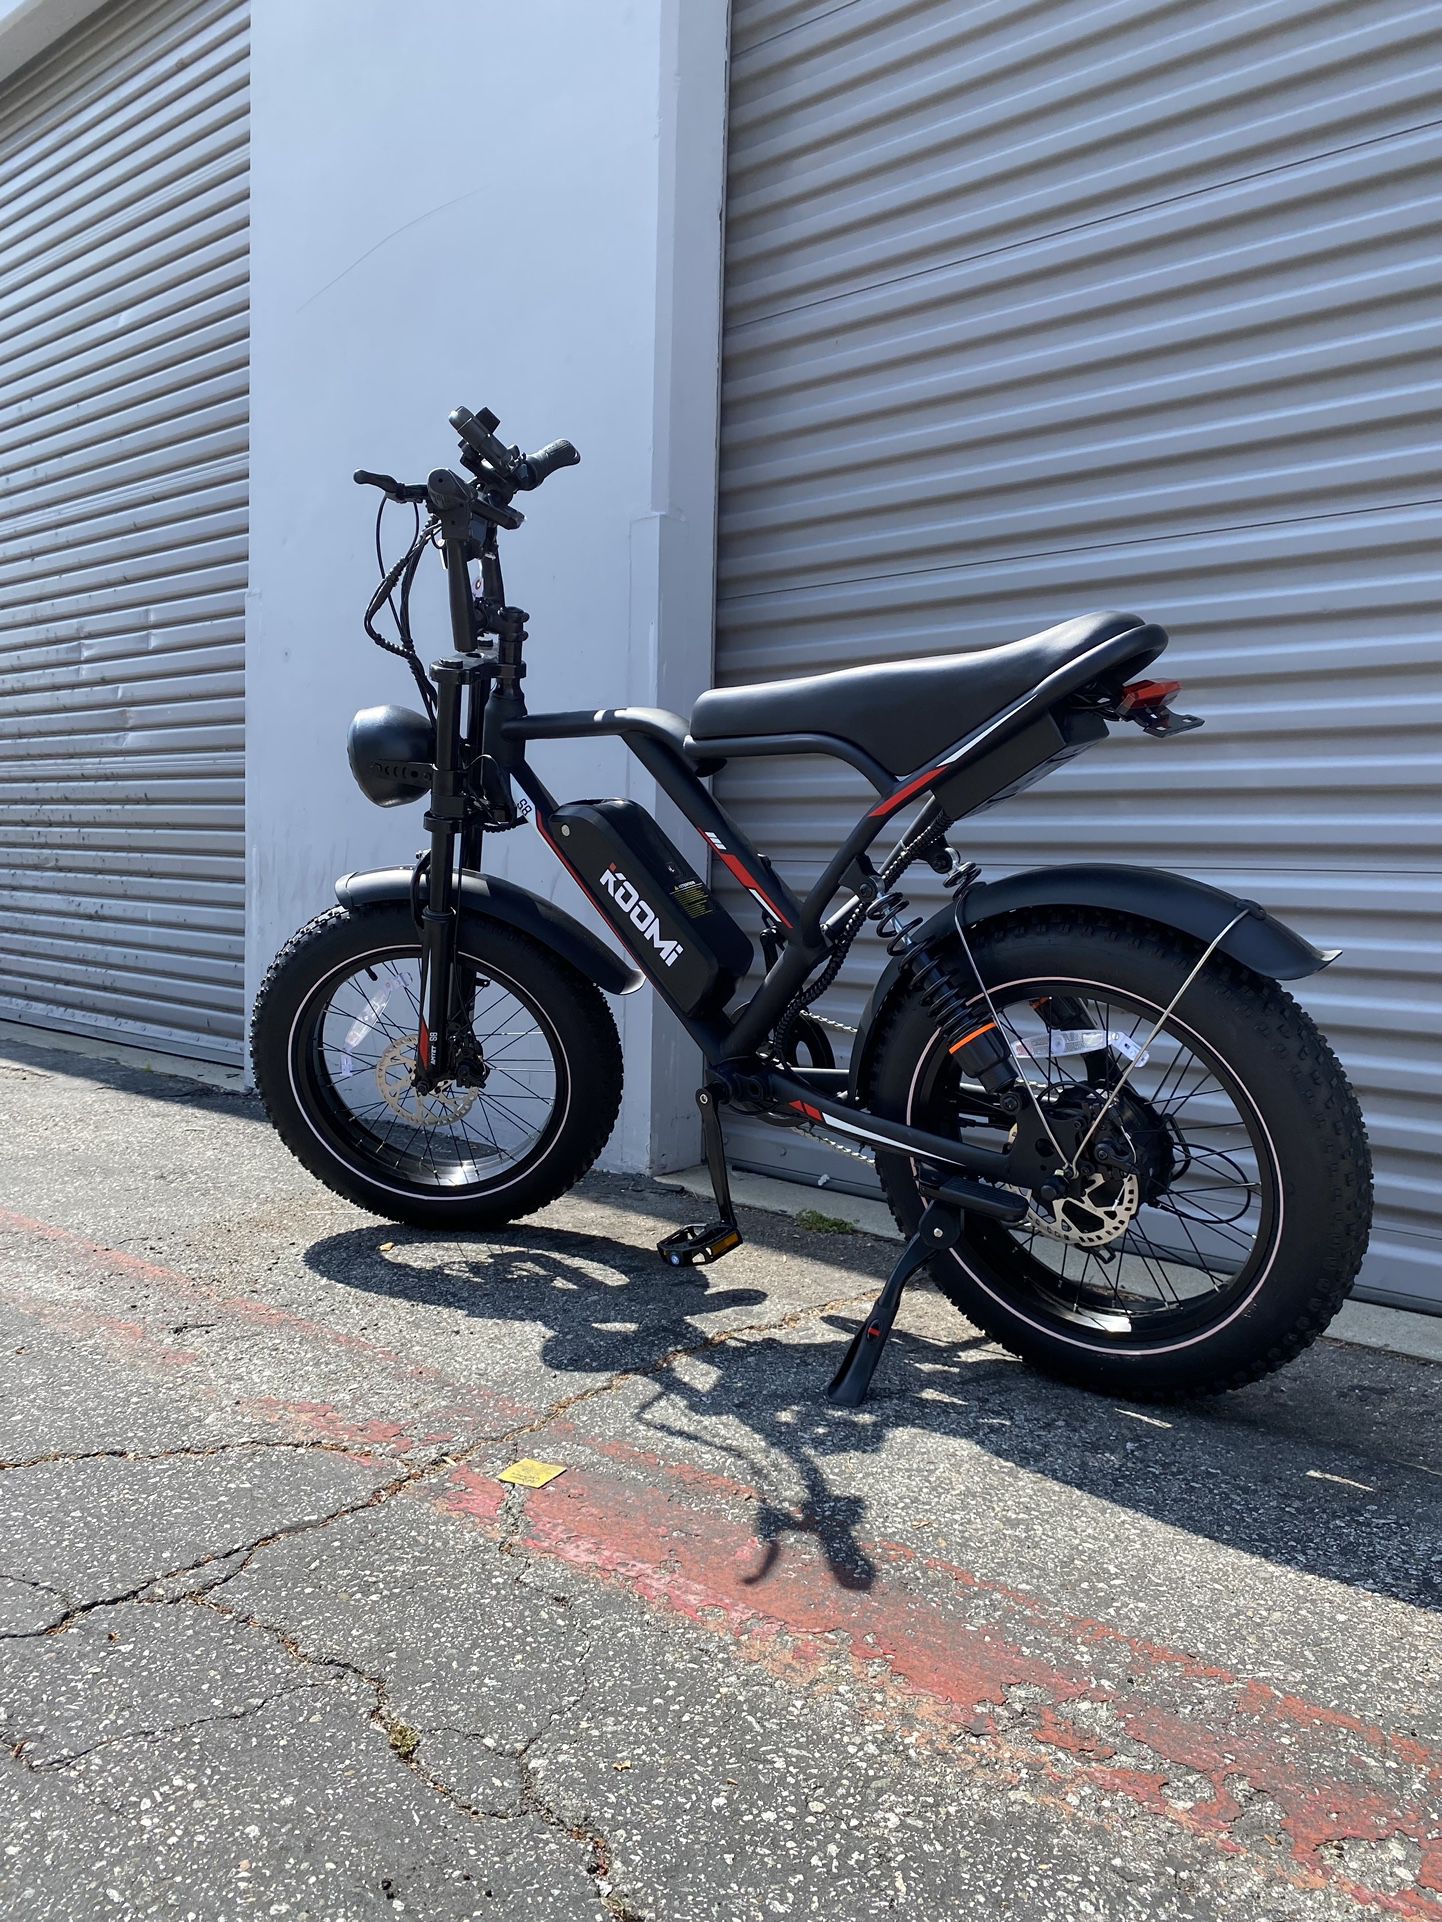 Brand new e-bike 750w 48v 17.5ah, top speed 28 mph. Full suspension, with chain lock, phone holder, foot pegs,  electric bike 